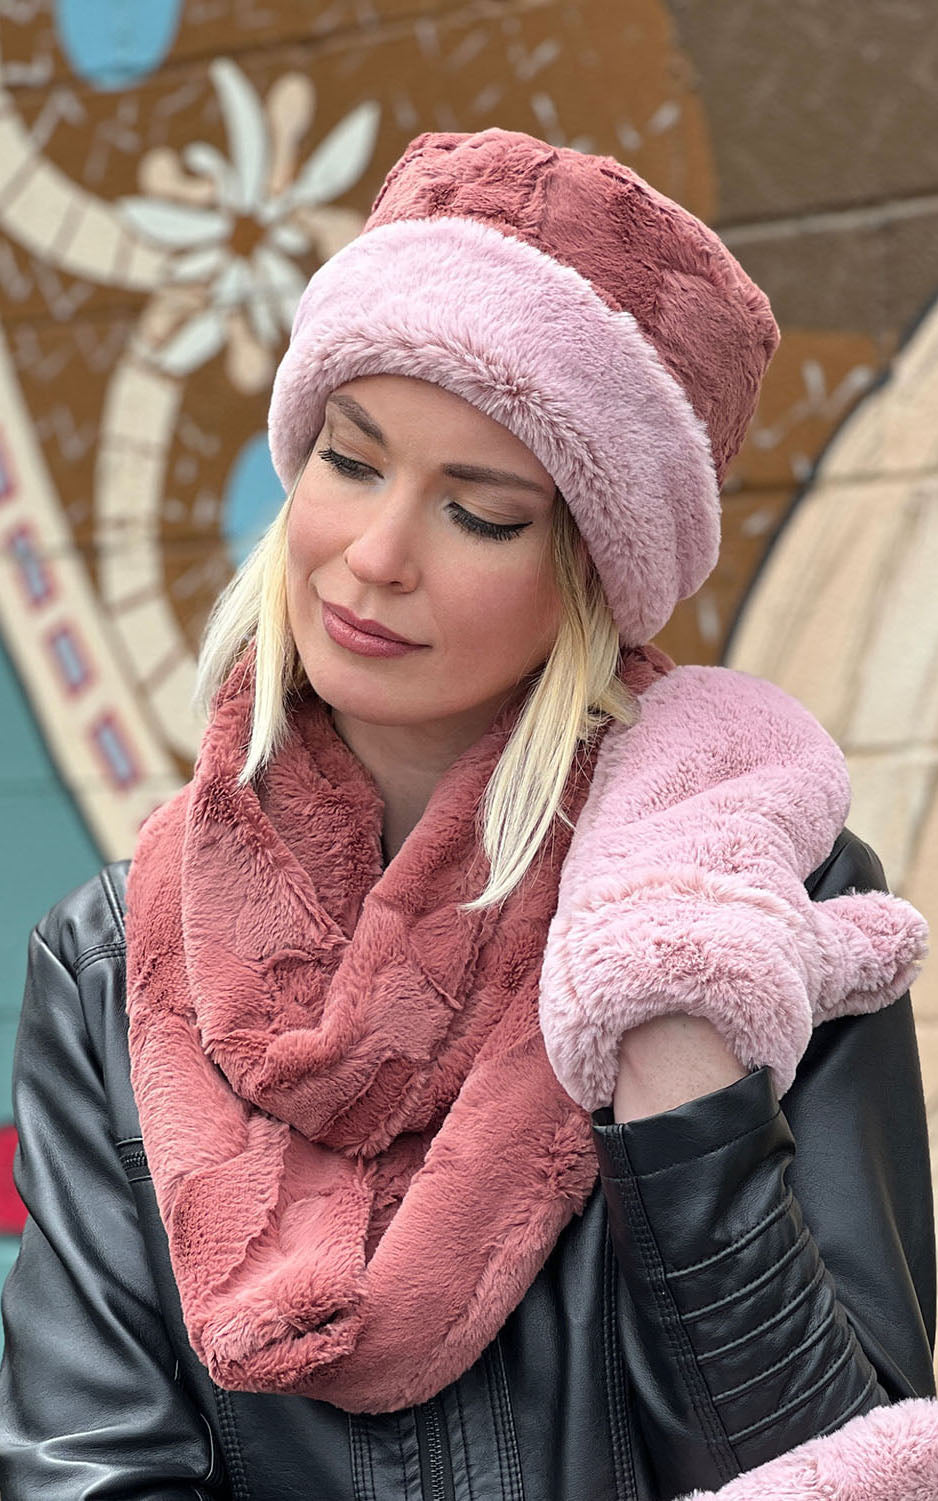 Model is wearing Infinity Scarf in Cuddly Faux Fur in Copper River with Frosted Cedar Faux Fur Mittens and Cuffed Pillbox by Pandemonium Seattle